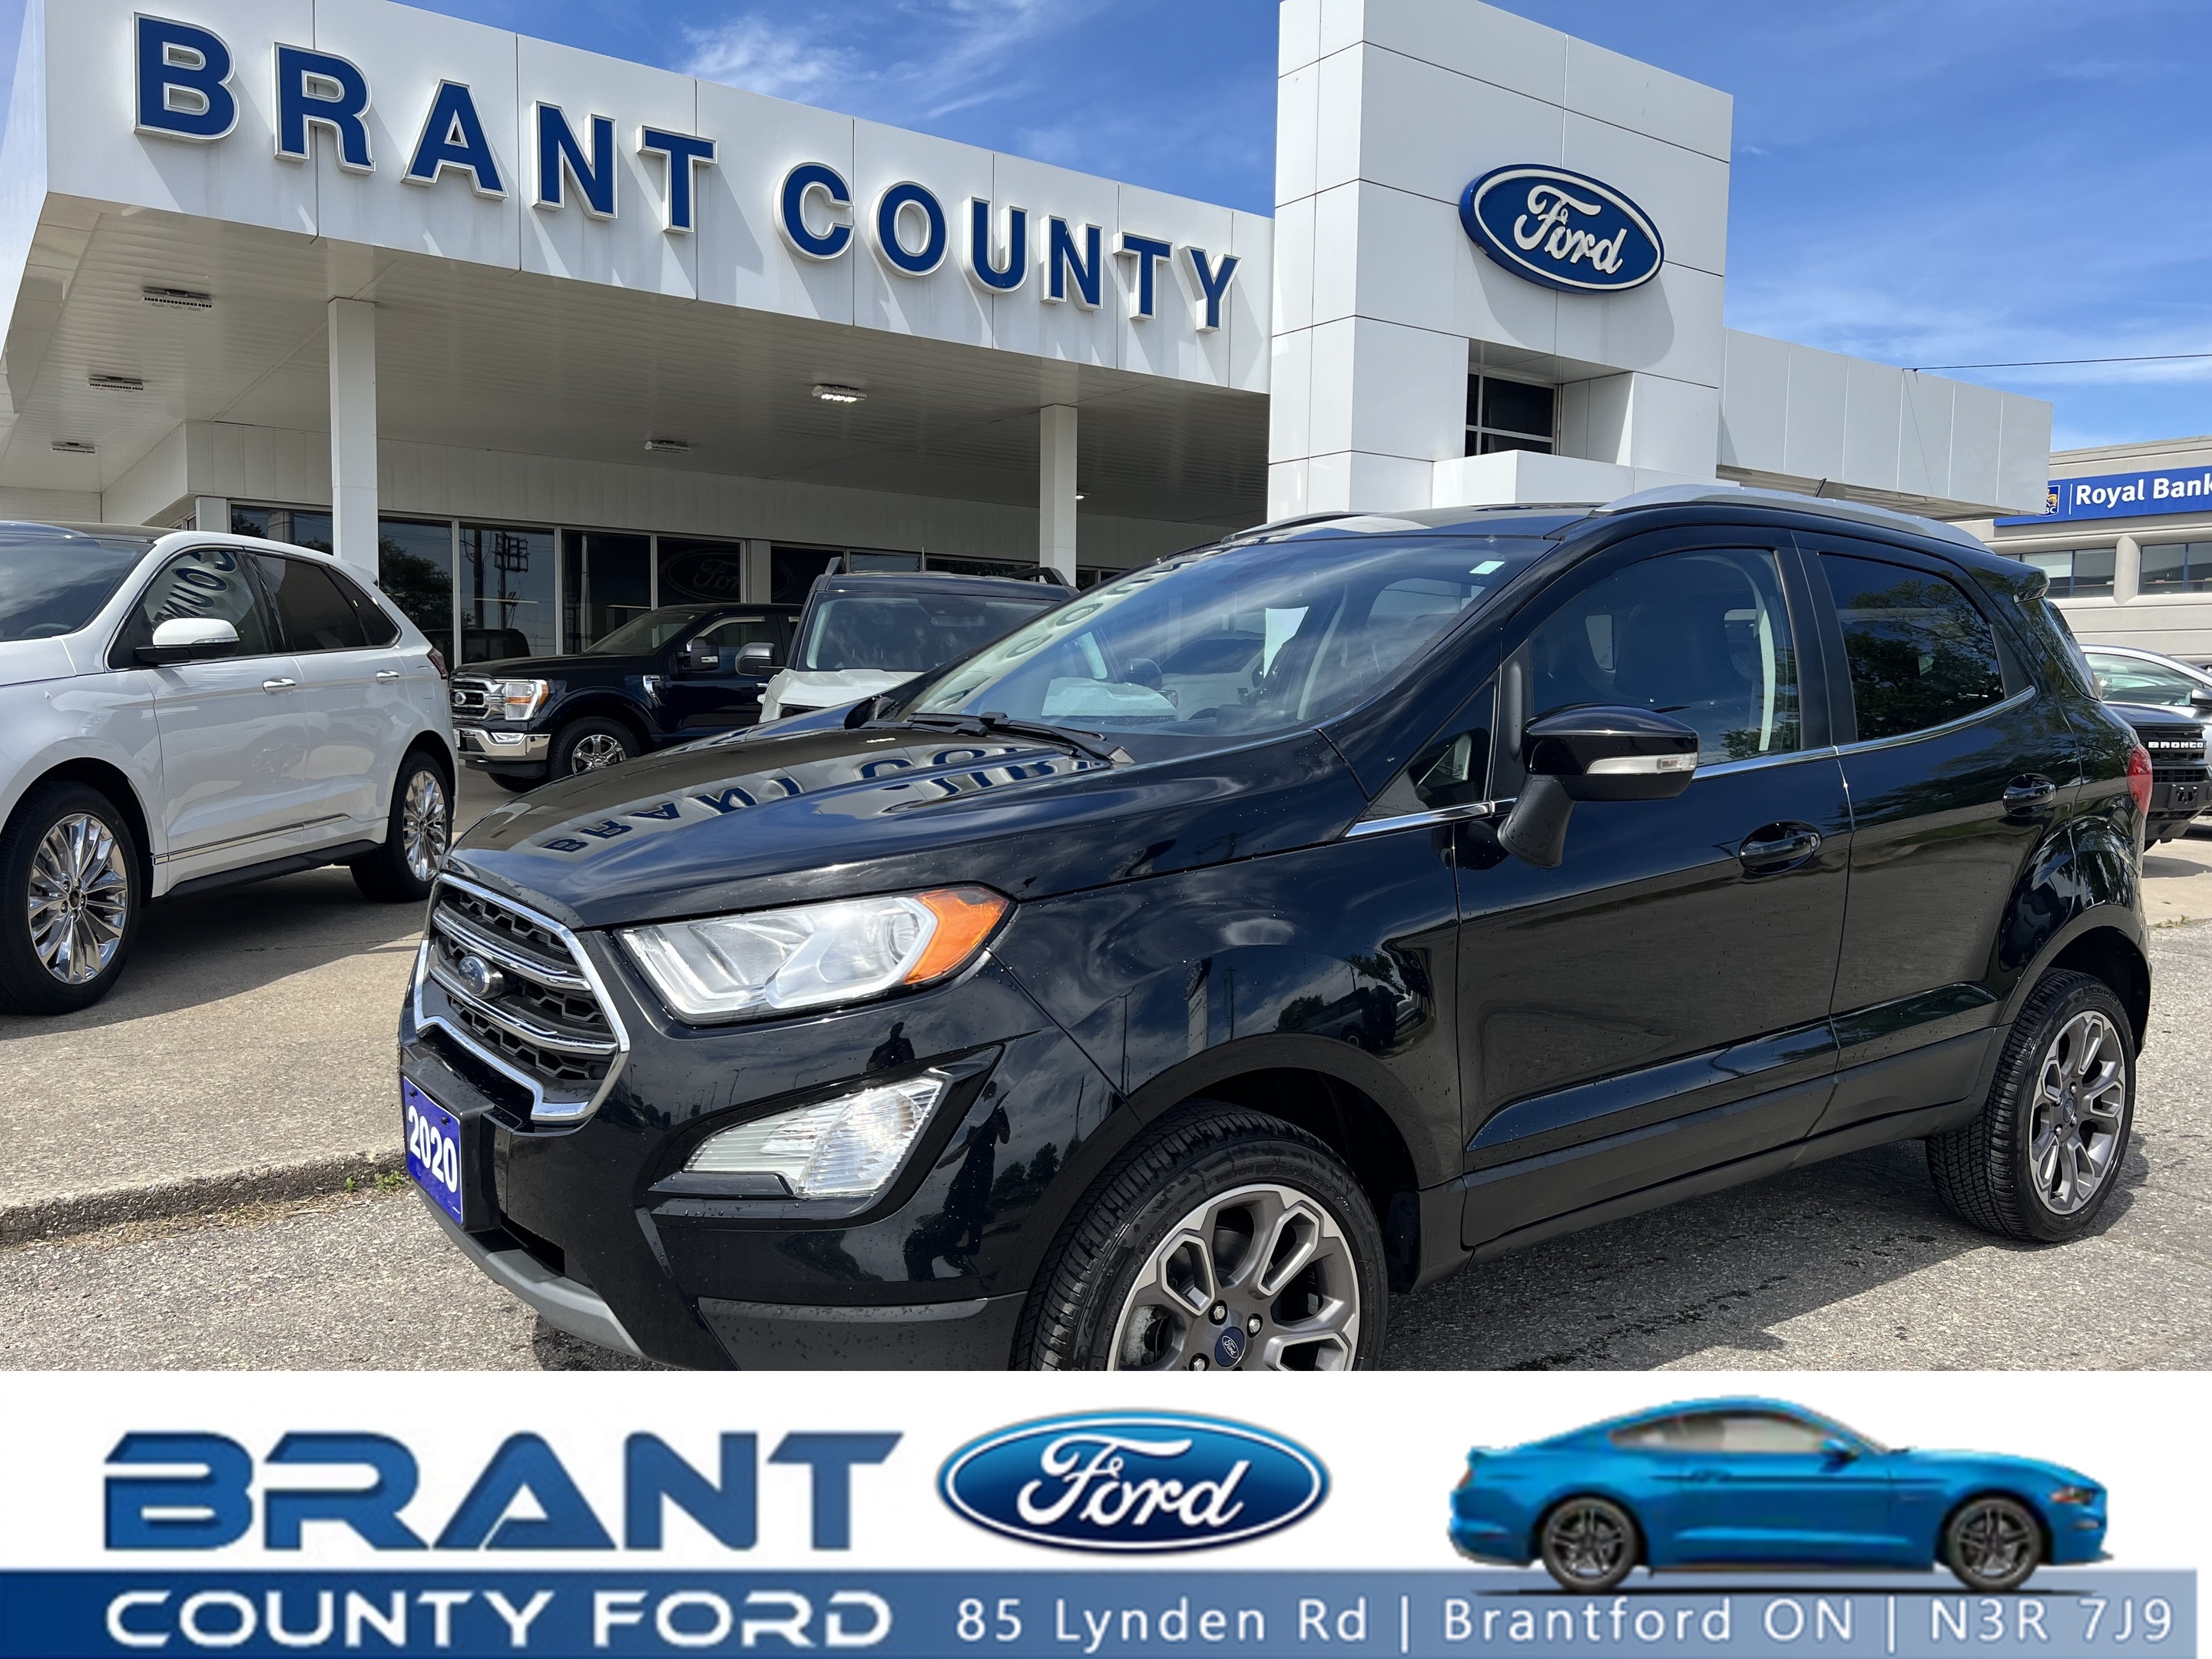 2020 Ford EcoSport Titanium 4WD moon roof navigation great commuter 